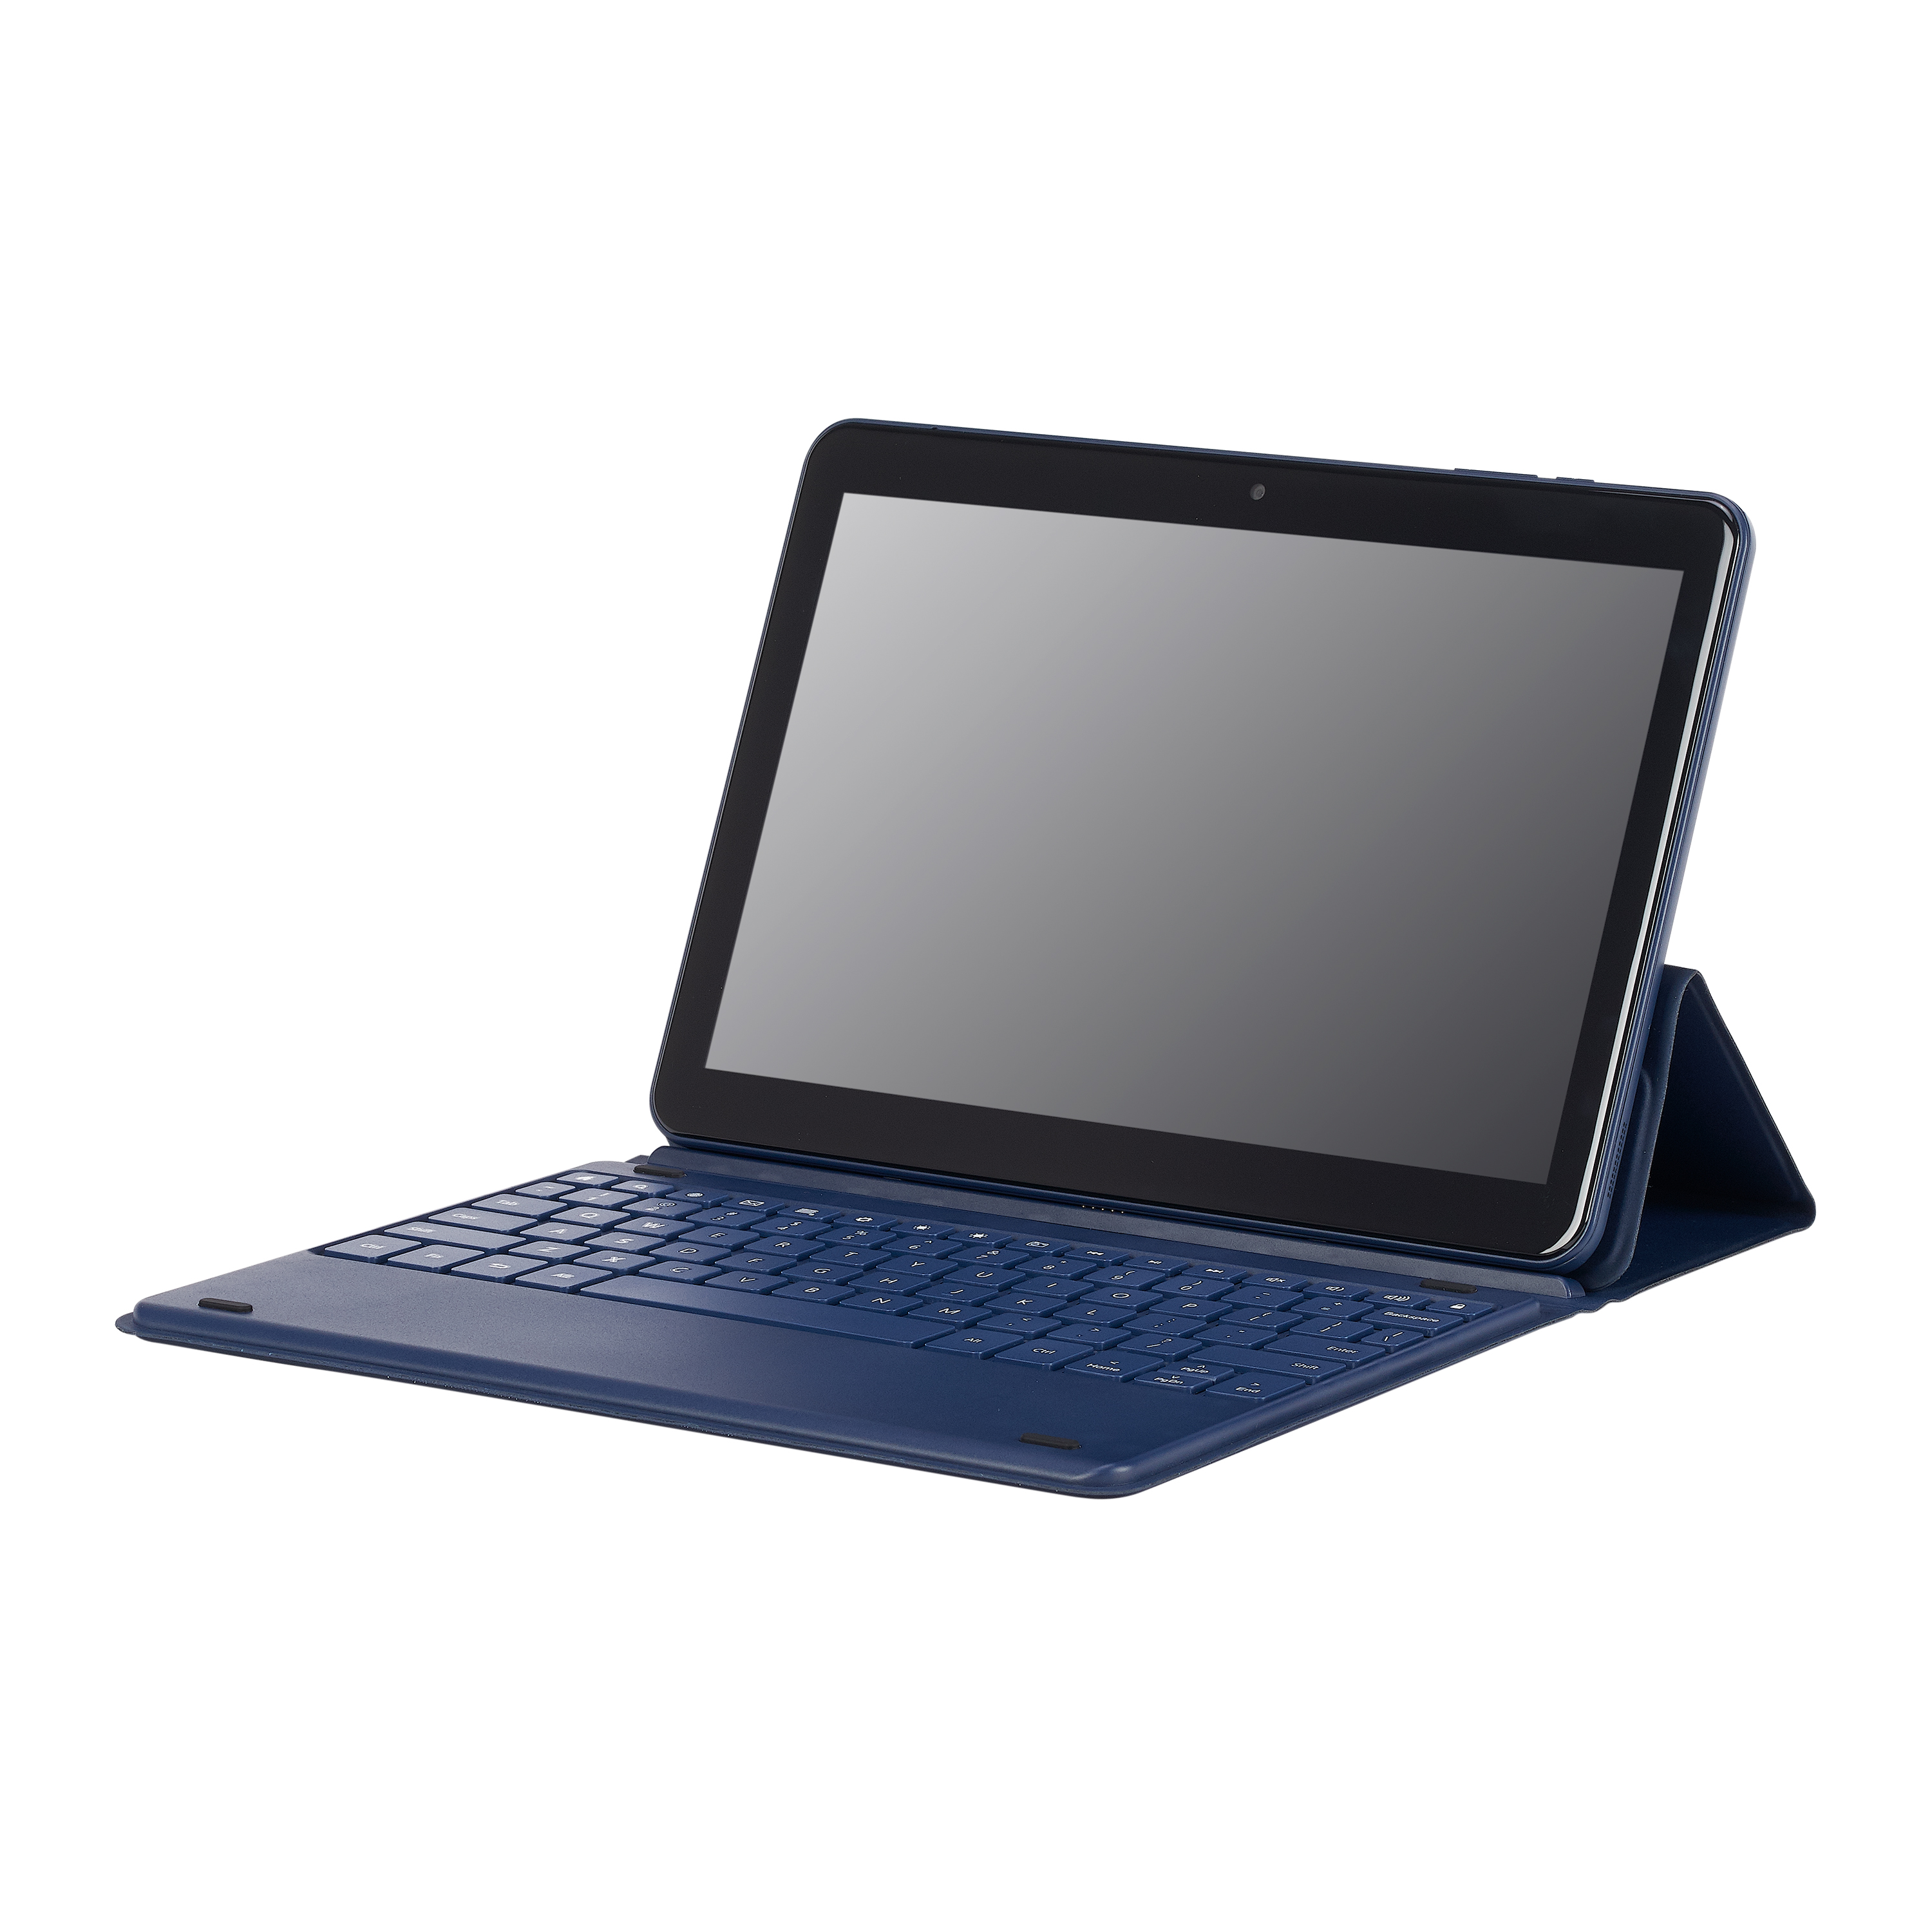 Onn. 10.1" Android Tablet with Detachable Keyboard, 16GB, Bonus $20 off Walmart eBooks Included - image 4 of 7